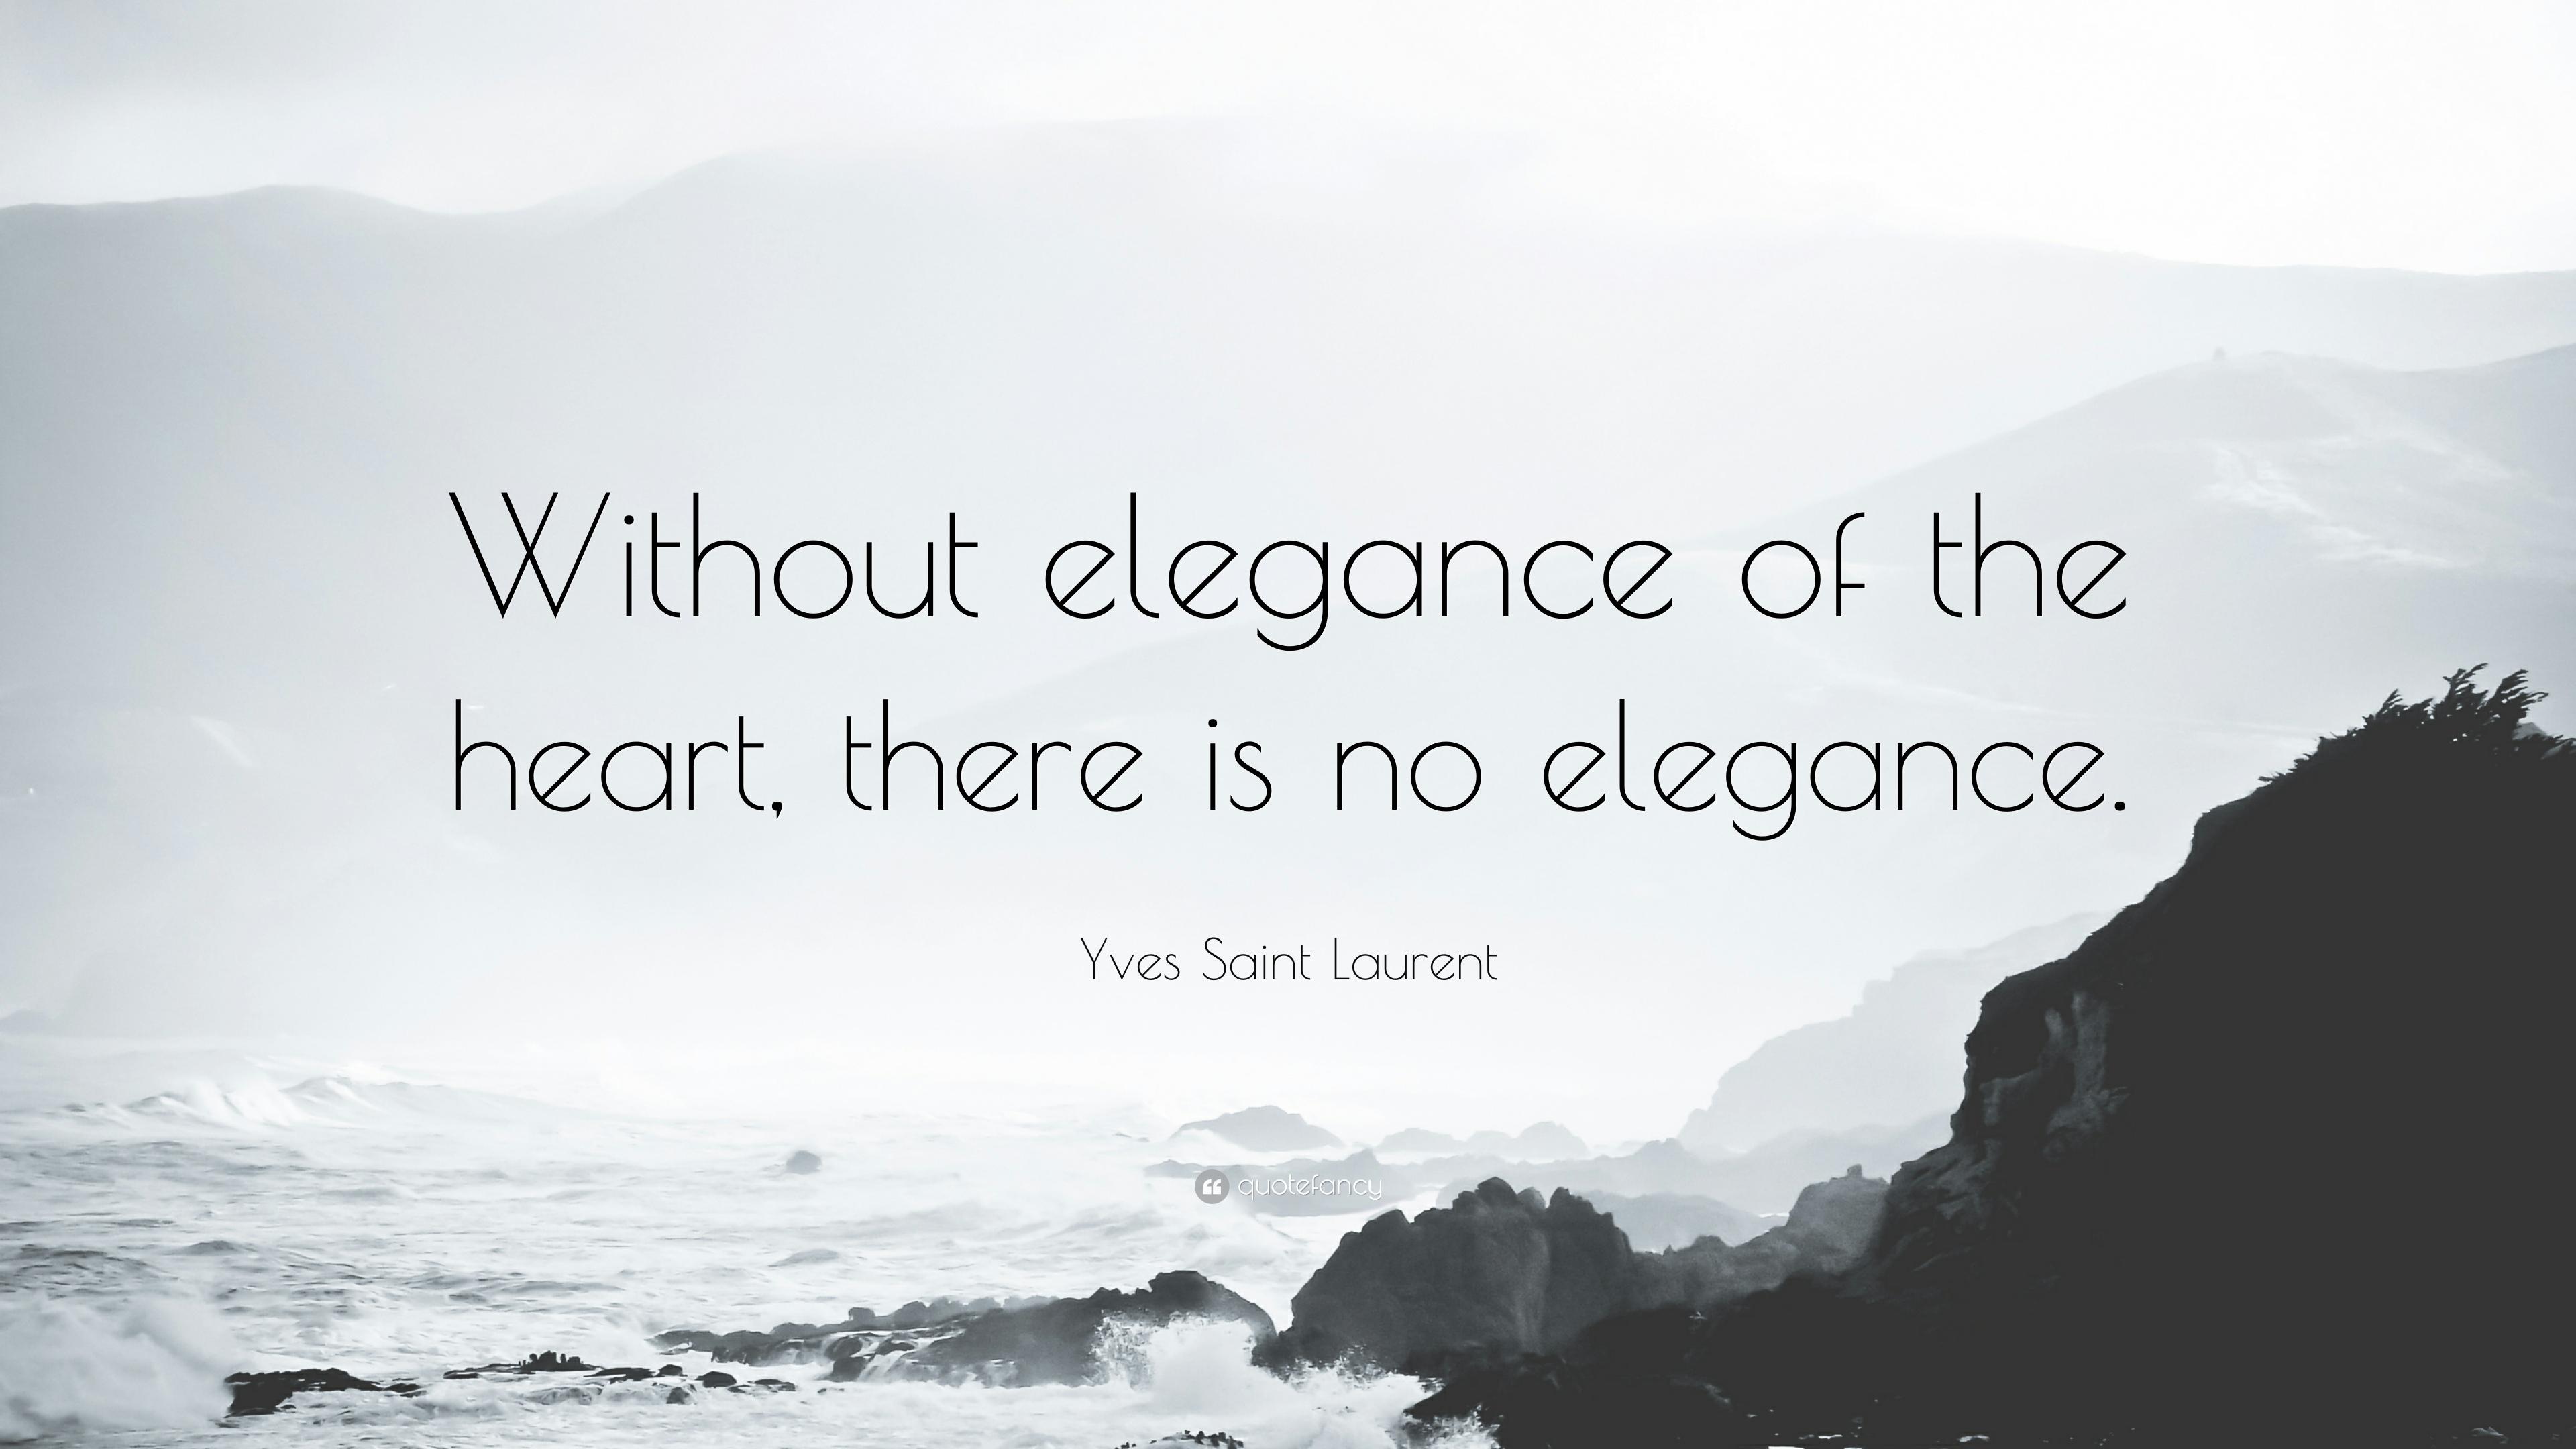 Yves Saint Laurent Quote: “Without elegance of the heart, there is